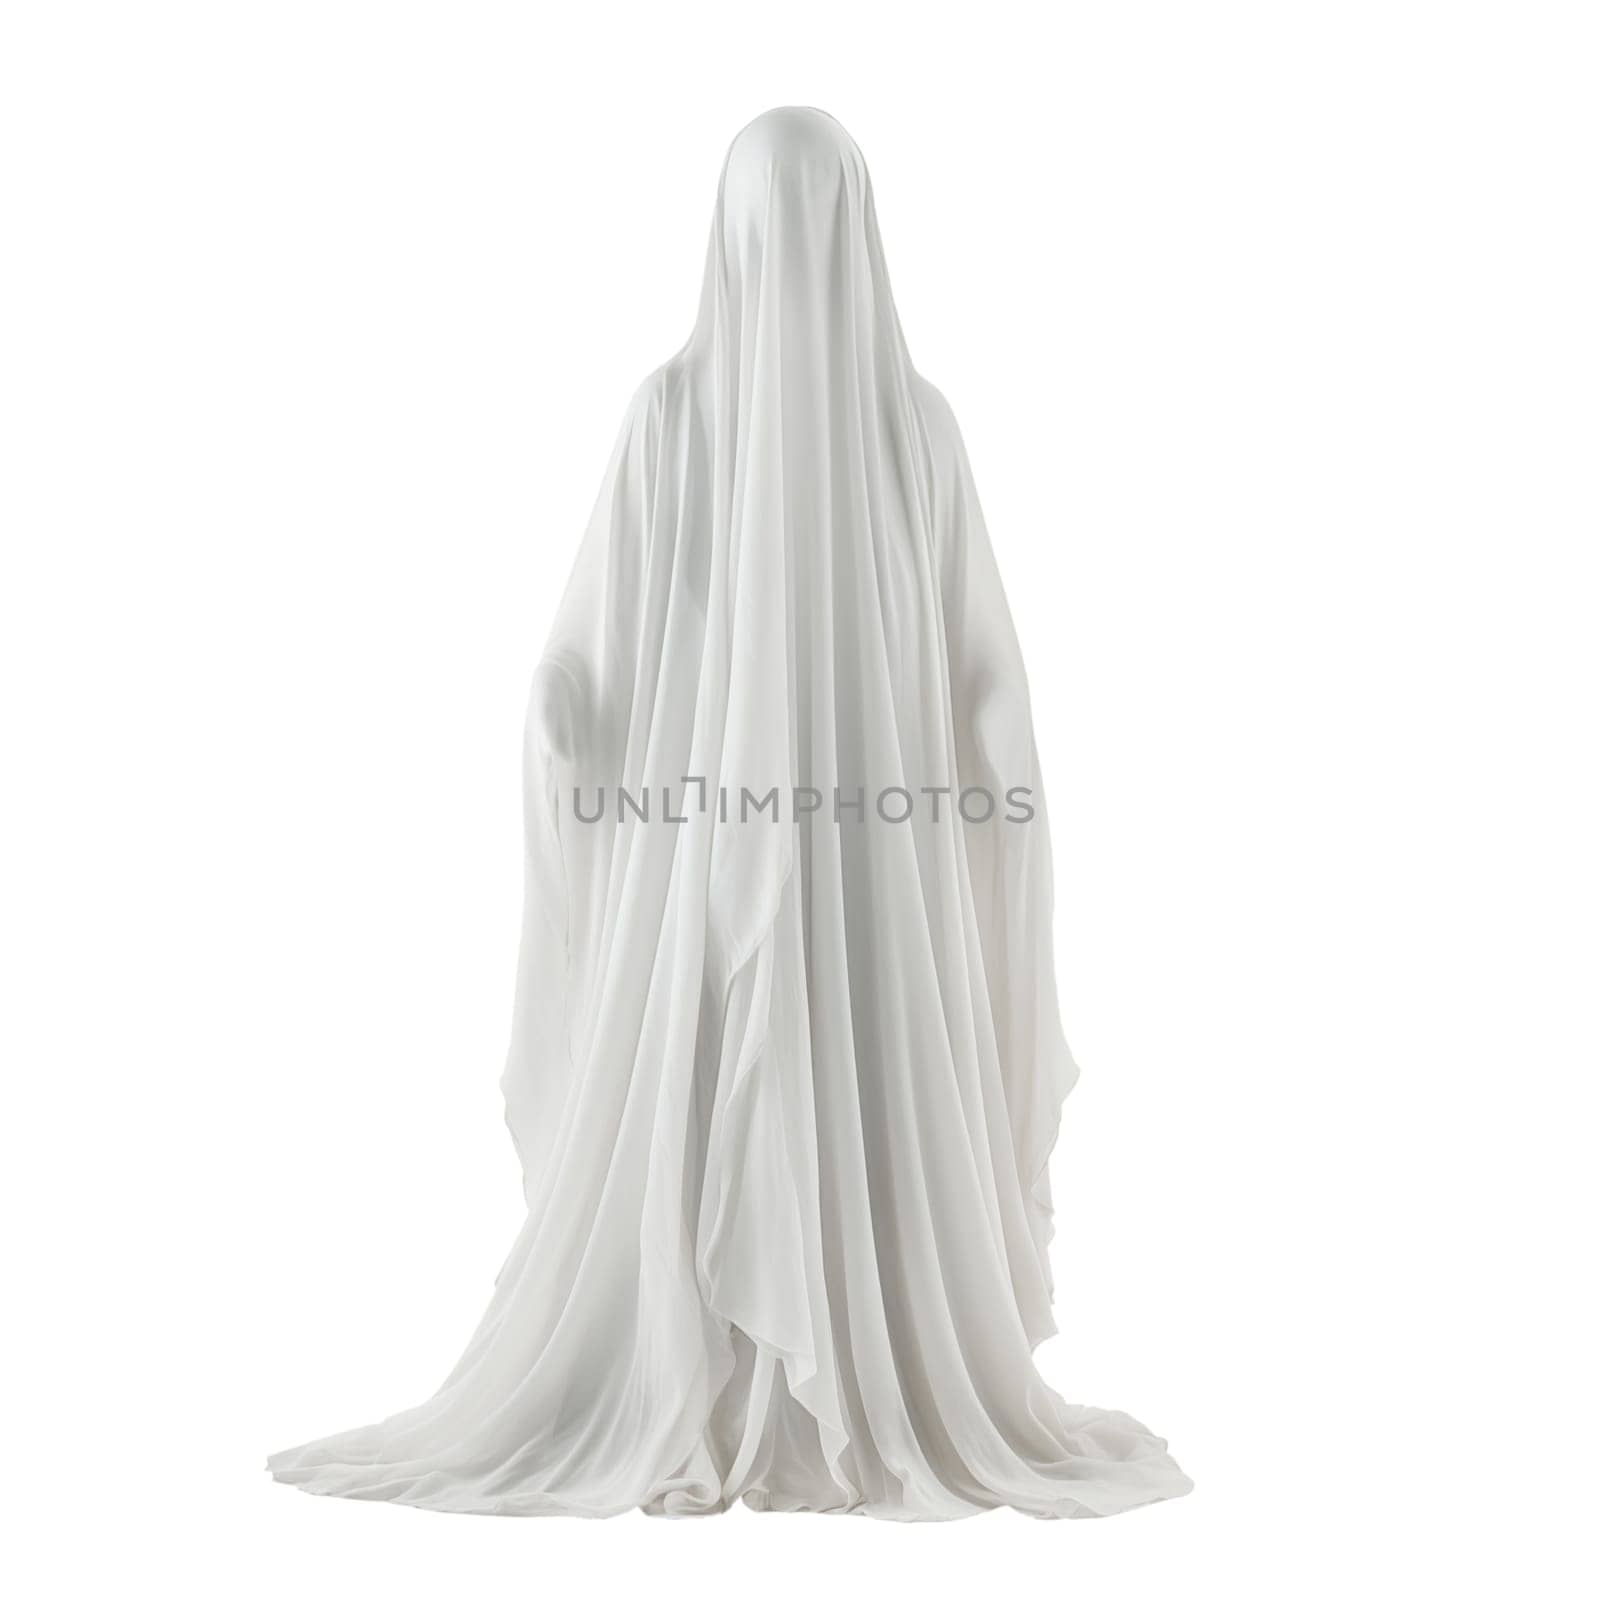 Ghost cut out on a transparent background. A ghost on a transparent background in PNG format for inserting into a design or project. High quality photo